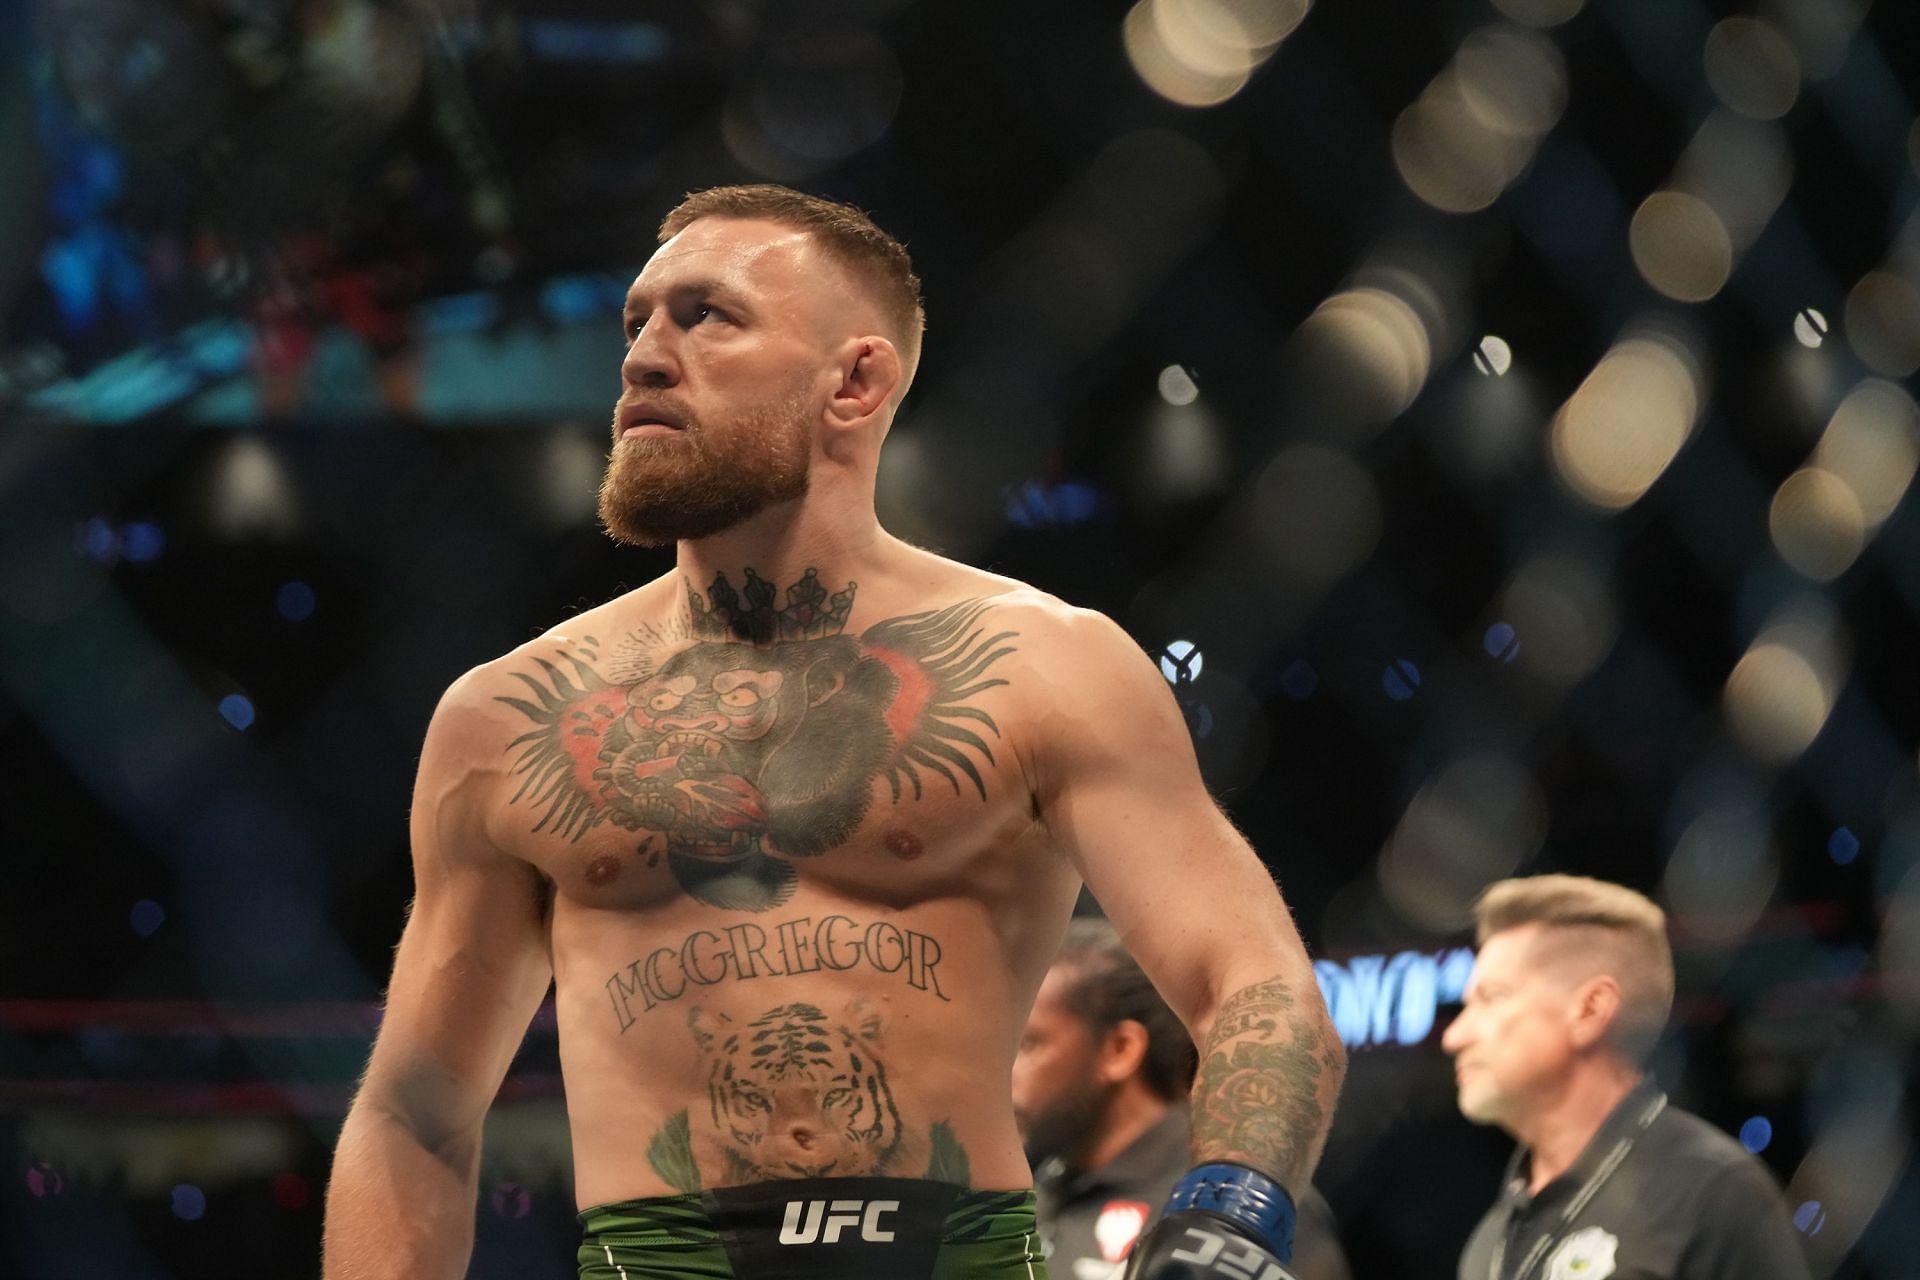 Conor McGregor is a former UFC double champion.